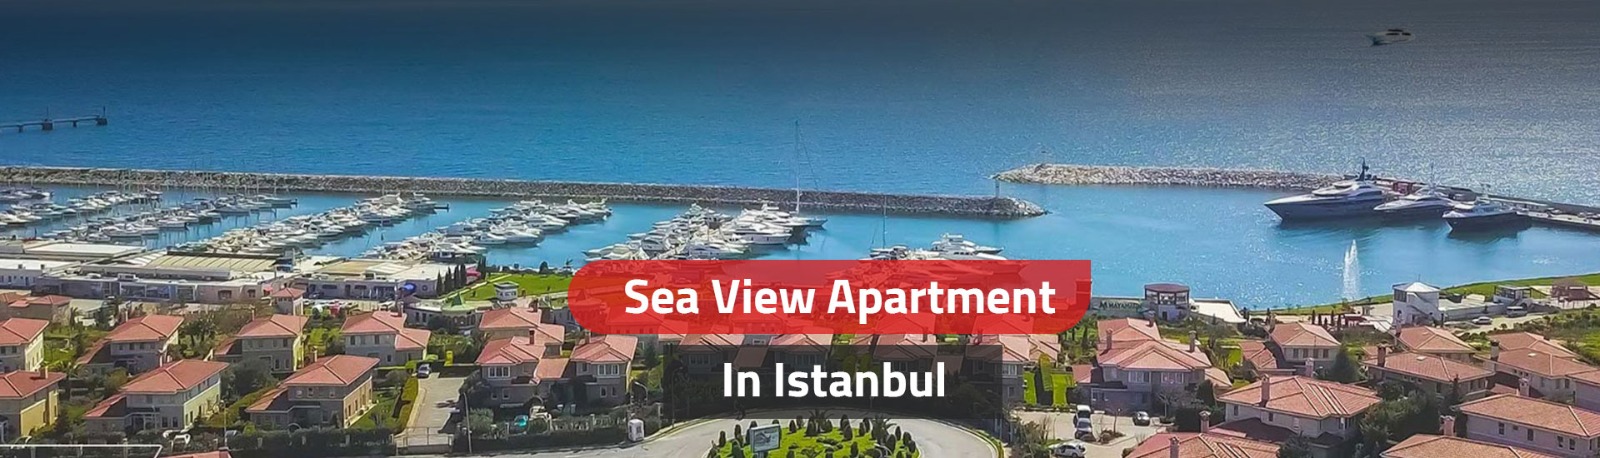 Apartments with Sea Views in Istanbul